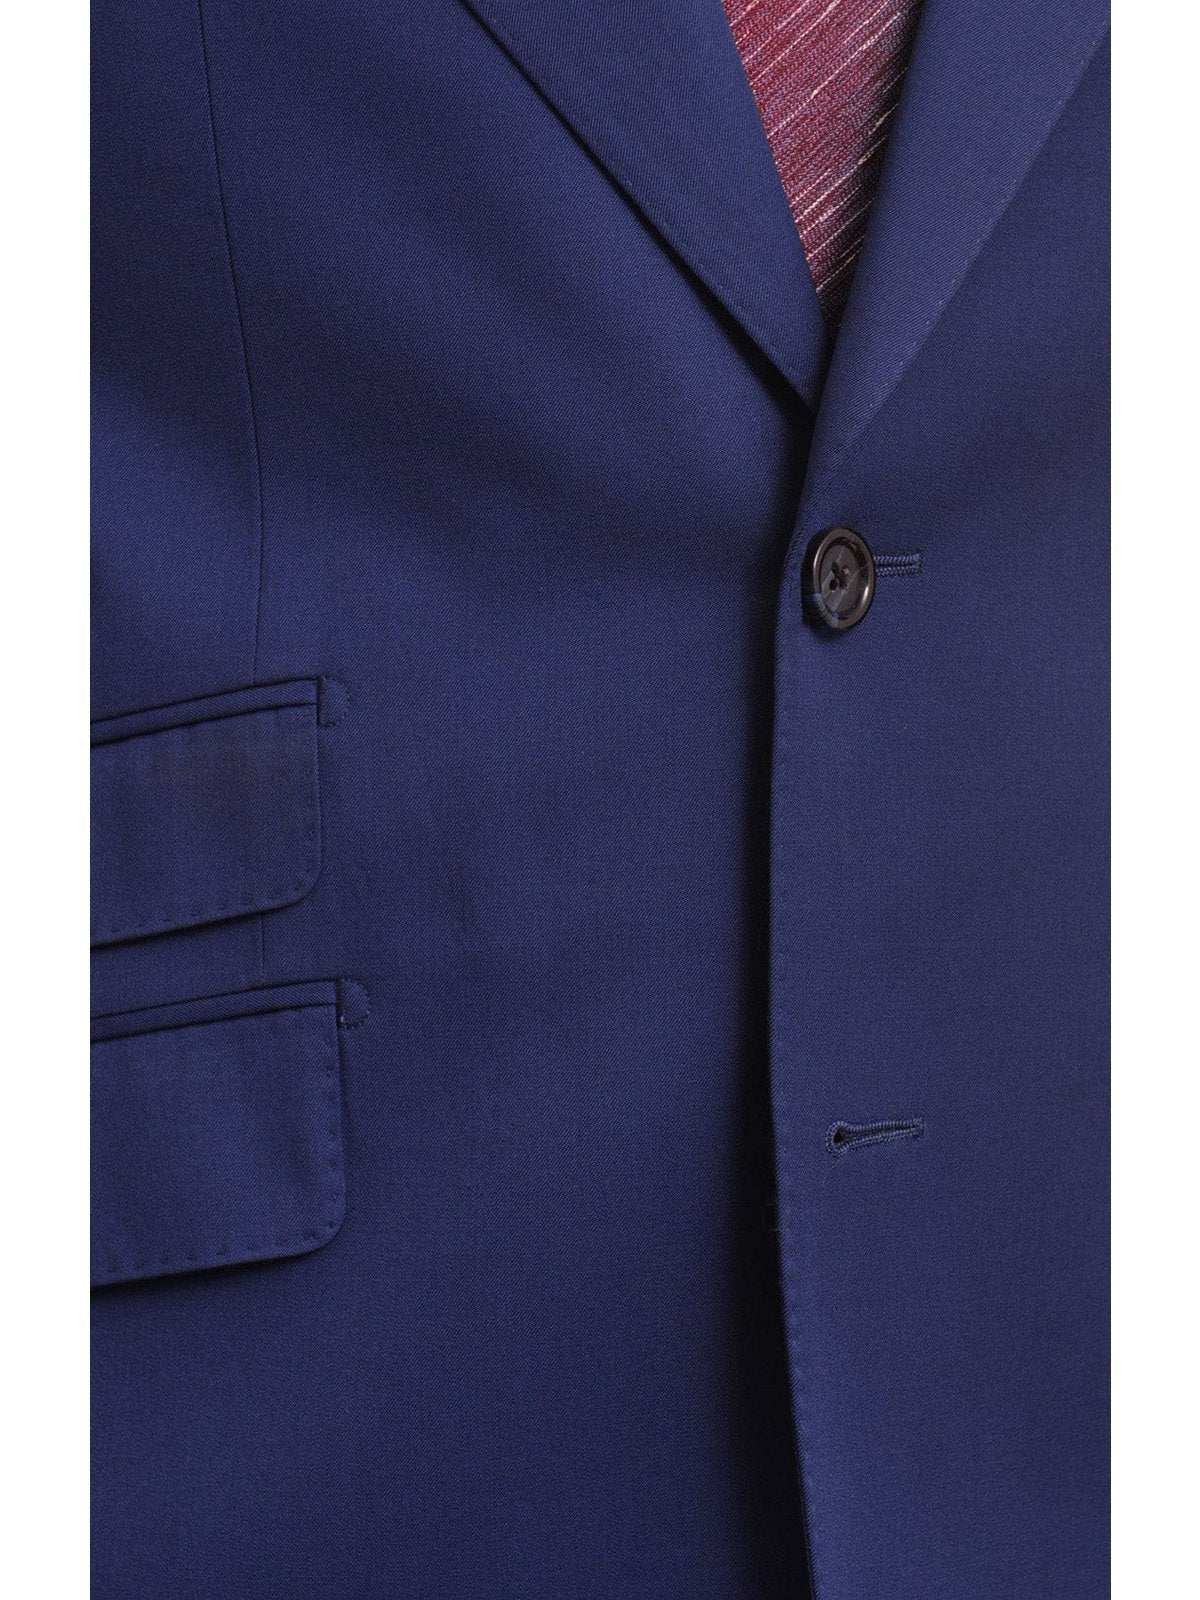 Napoli TWO PIECE SUITS Men's Napoli Slim Fit Solid Royal Blue Half Canvassed Two Button Reda Wool Suit